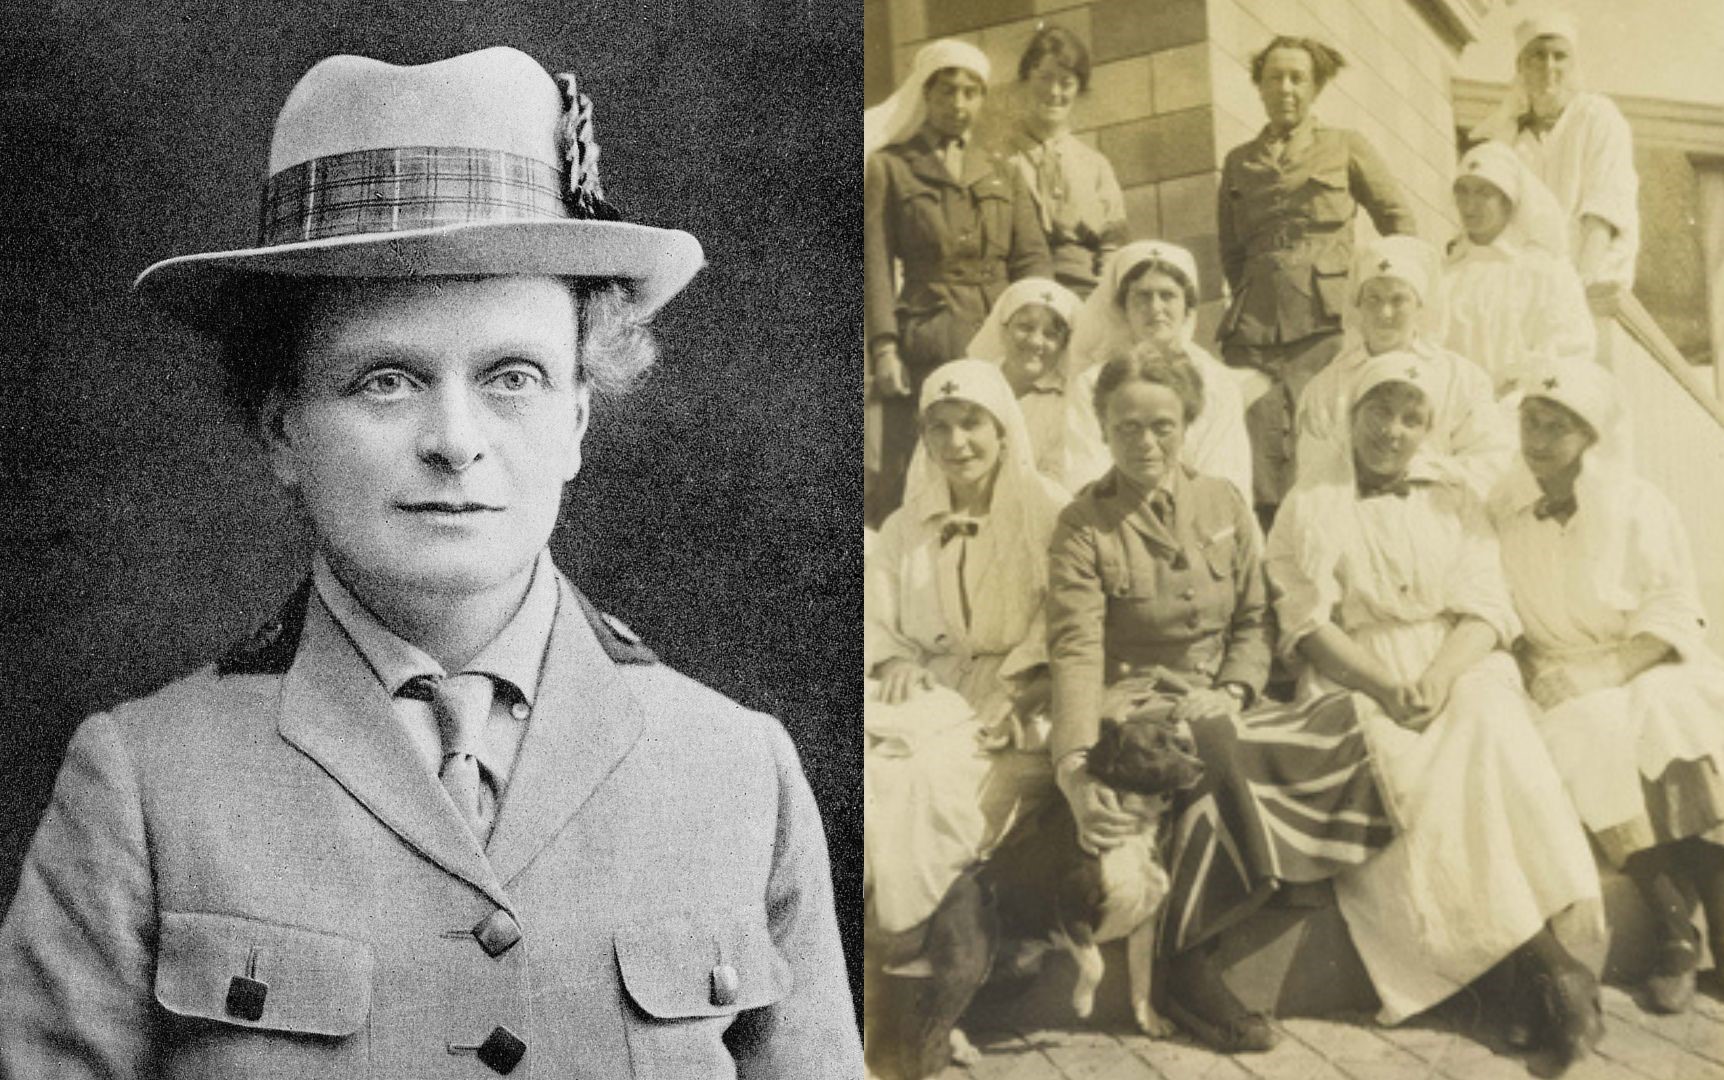 Elsie Inglis: the good lady who refused to ‘go home and sit still’